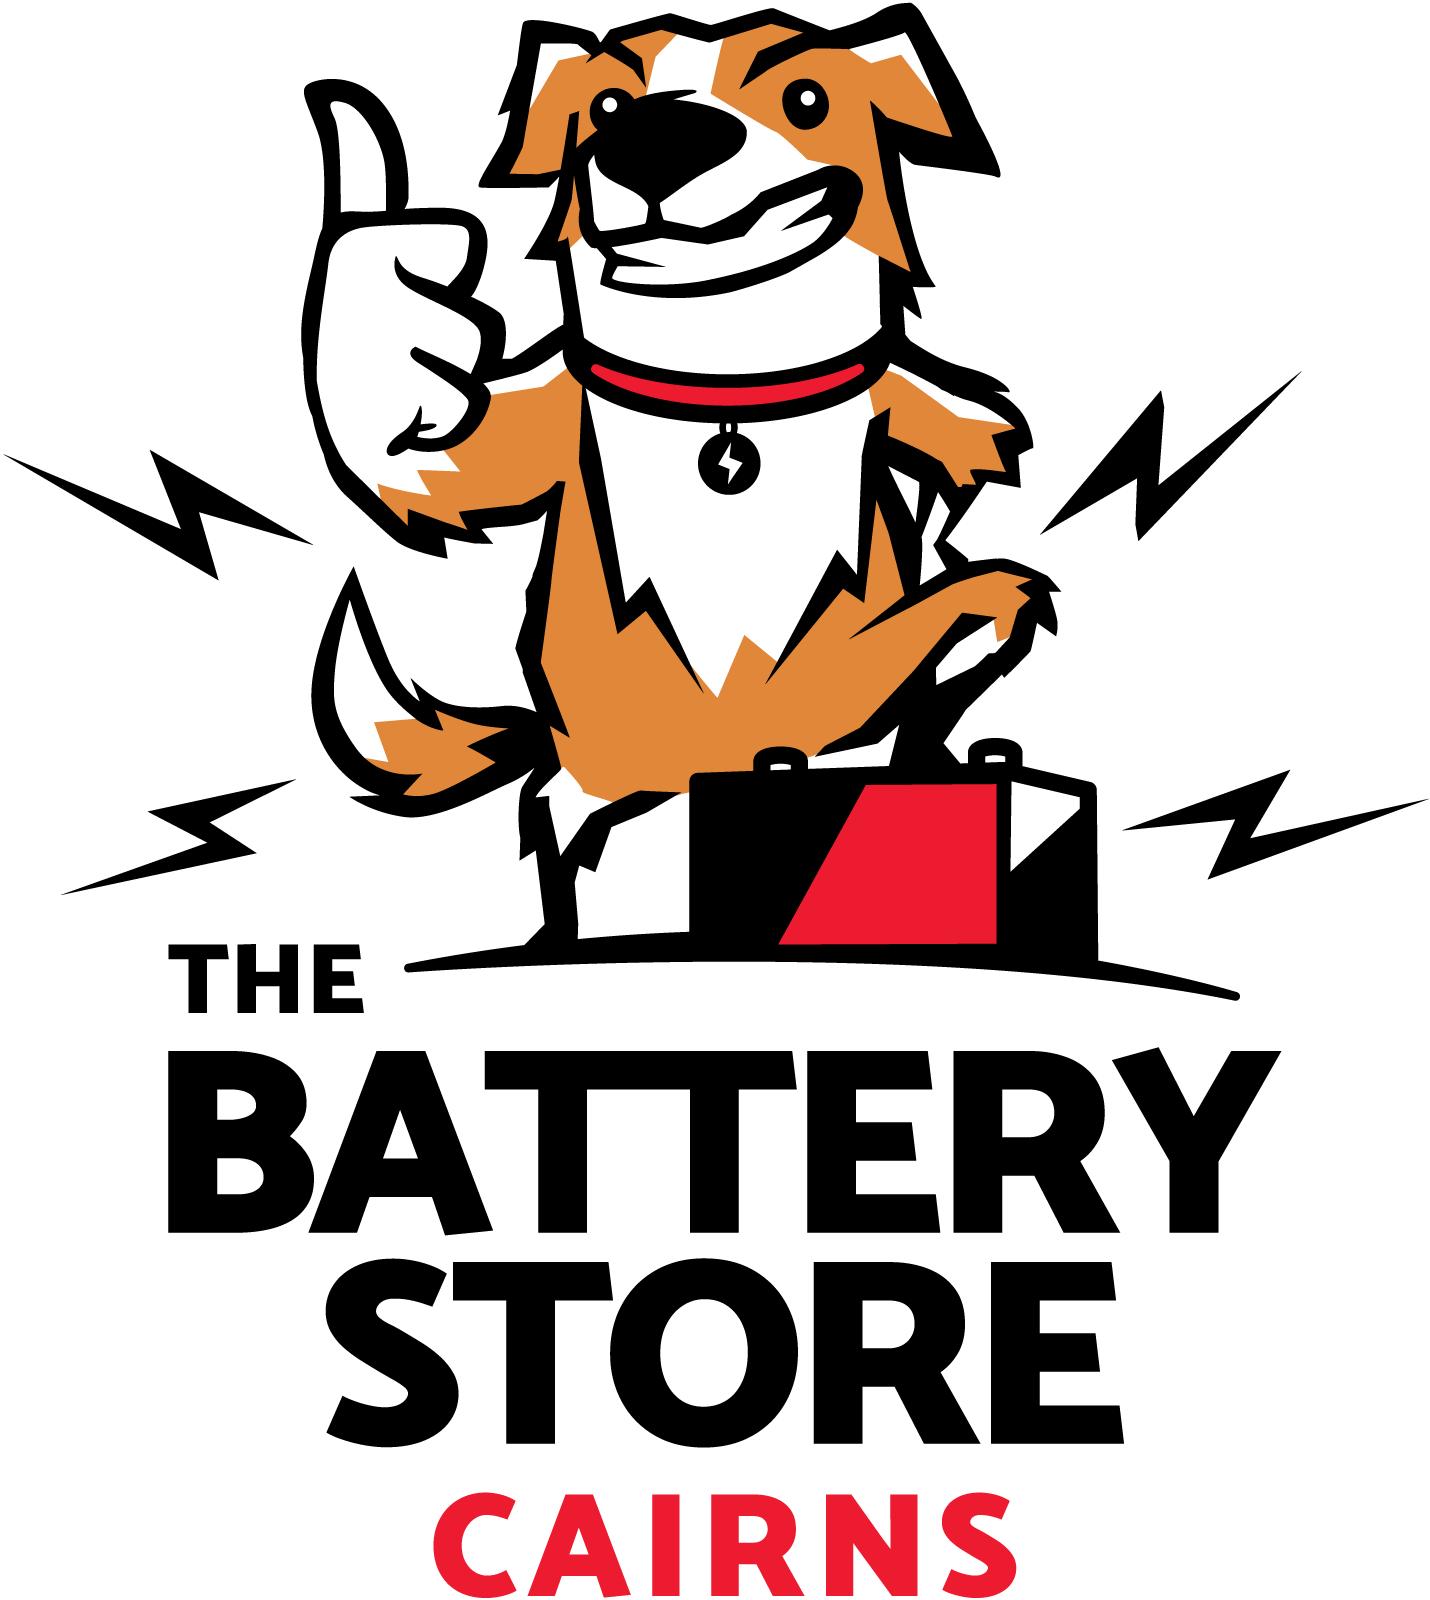 The Battery Store Cairns